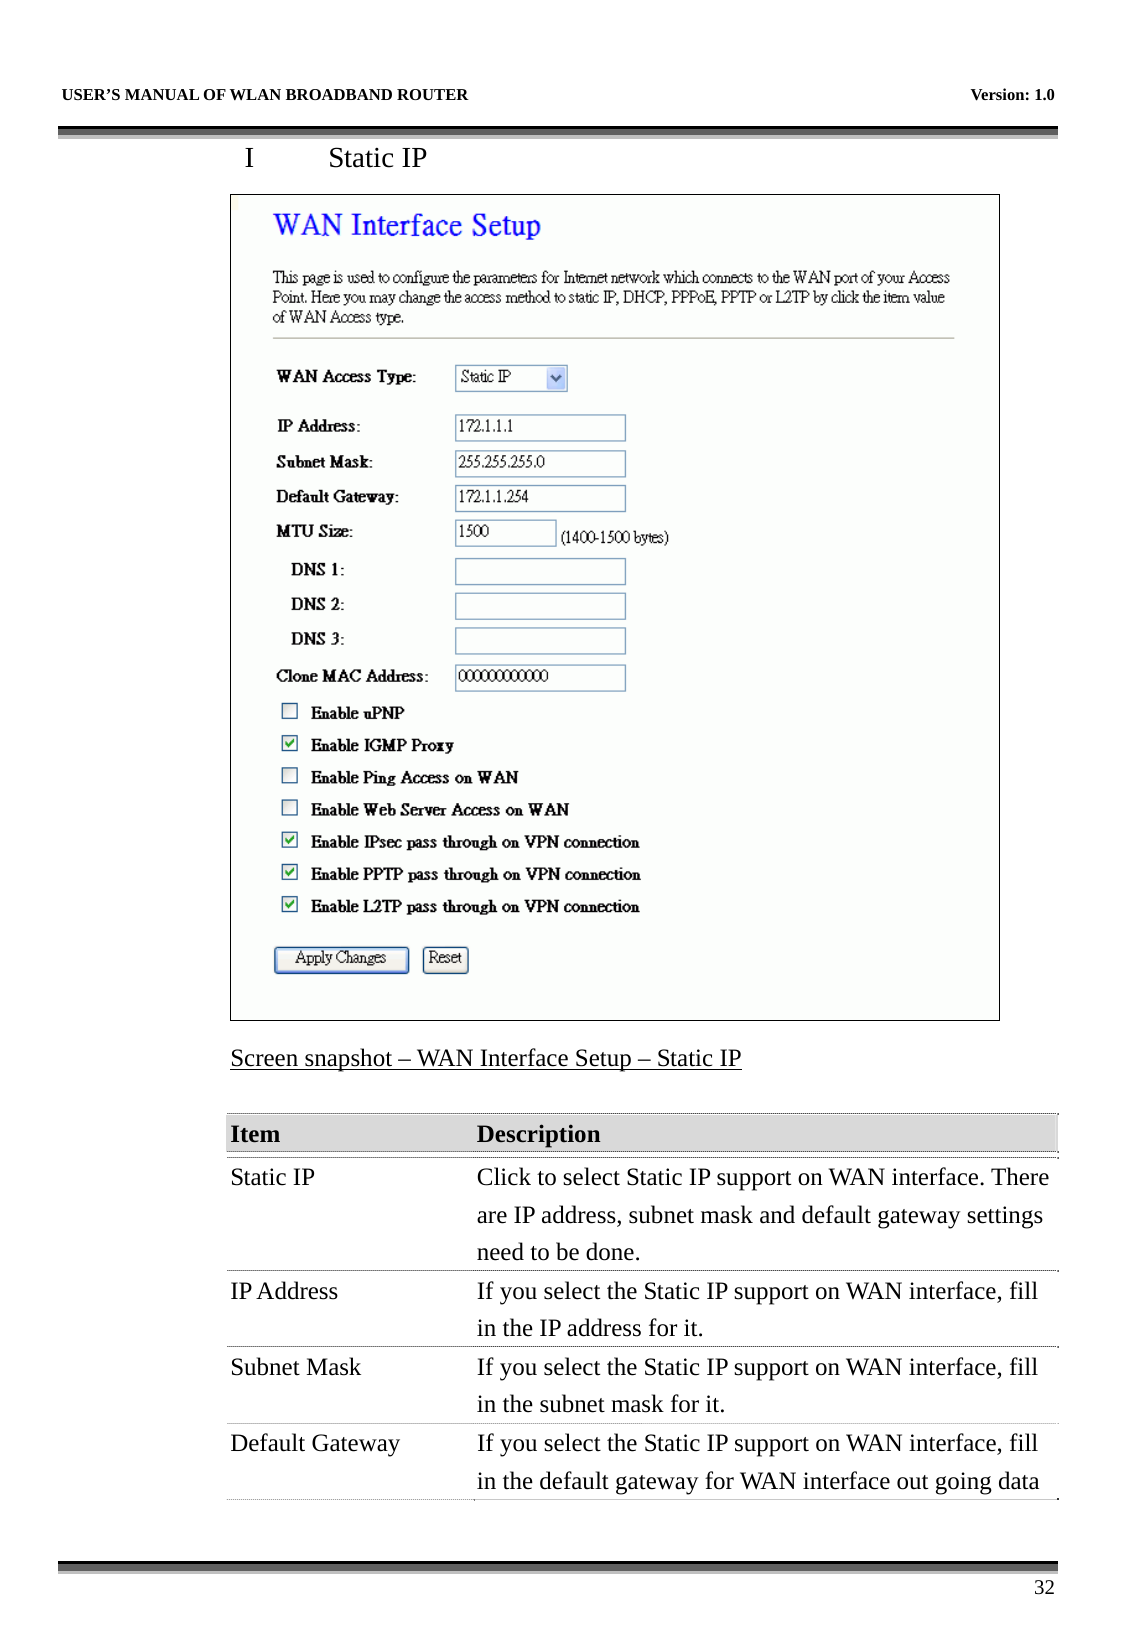   USER’S MANUAL OF WLAN BROADBAND ROUTER    Version: 1.0      32 I  Static IP  Screen snapshot – WAN Interface Setup – Static IP  Item  Description   Static IP  Click to select Static IP support on WAN interface. There are IP address, subnet mask and default gateway settings need to be done. IP Address  If you select the Static IP support on WAN interface, fill in the IP address for it. Subnet Mask  If you select the Static IP support on WAN interface, fill in the subnet mask for it. Default Gateway  If you select the Static IP support on WAN interface, fill in the default gateway for WAN interface out going data 